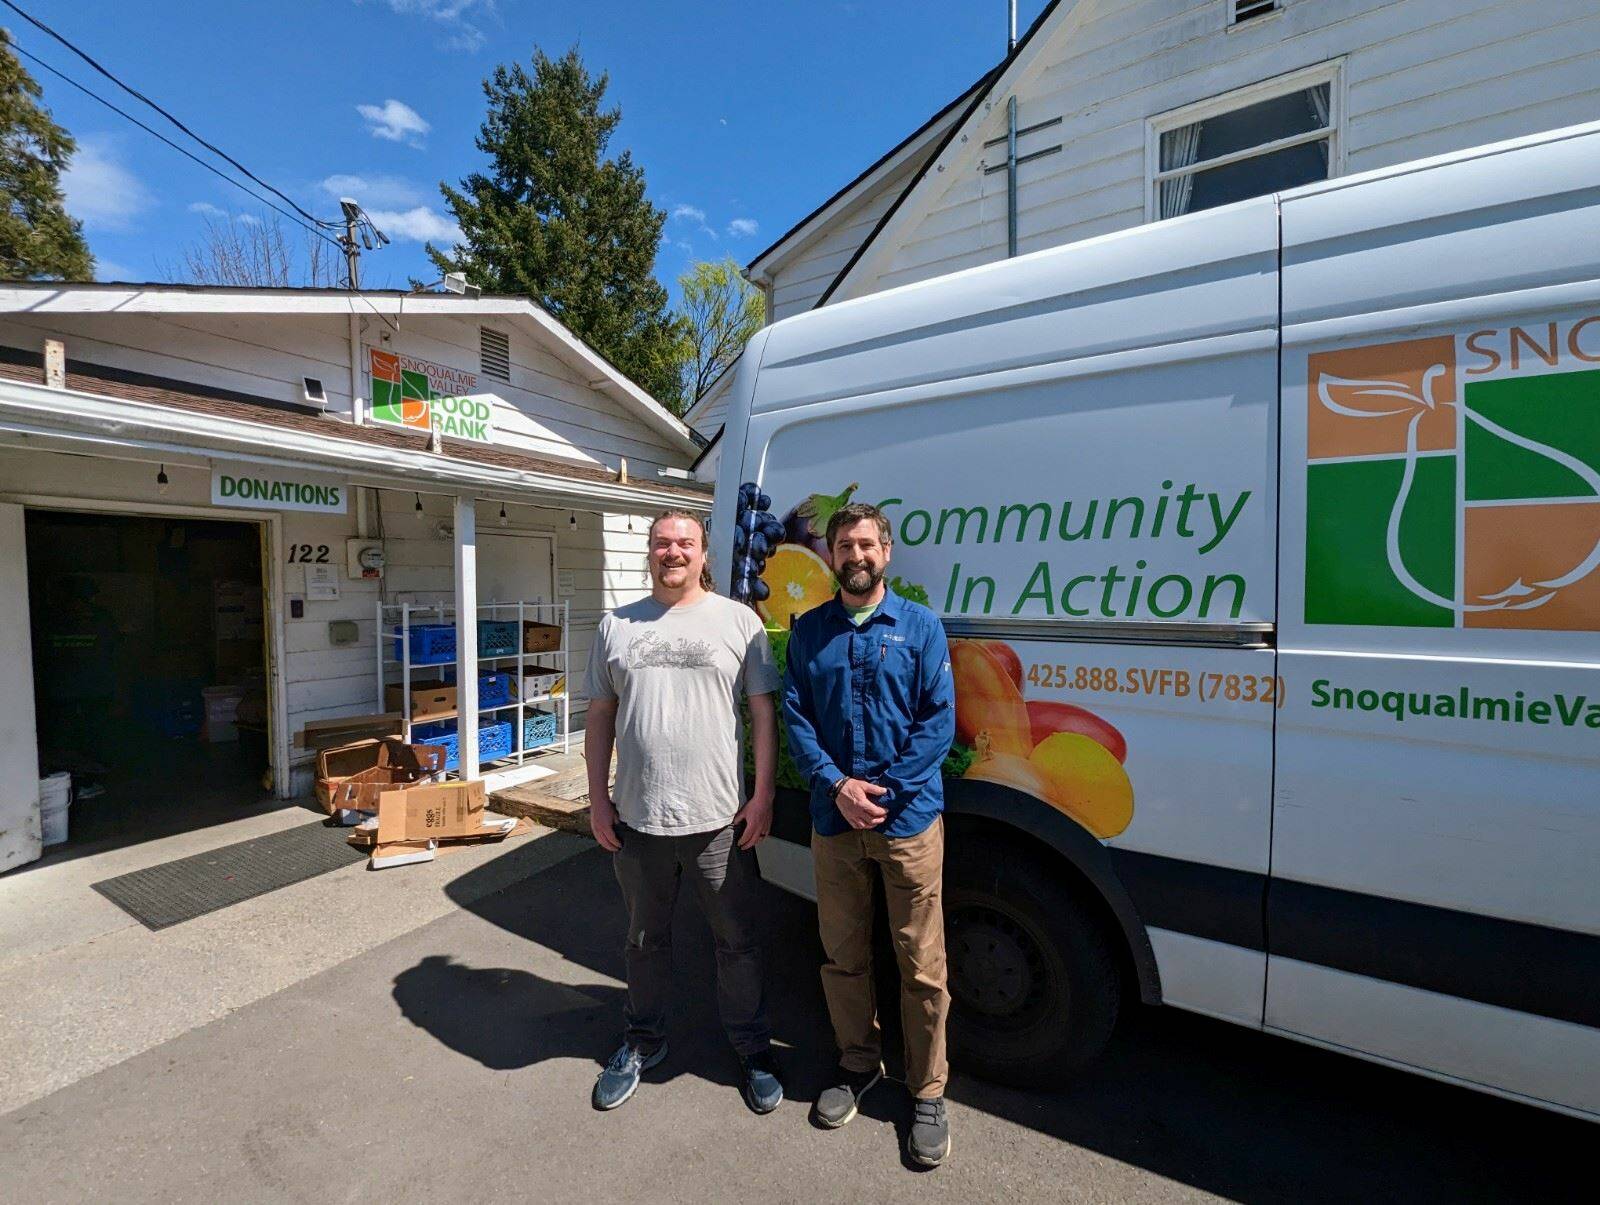 The Snoqualmie Valley Food Bank, which provides food for over 250 households each week, was awarded charitable funds from the Tribe last year. (Courtesy photo)